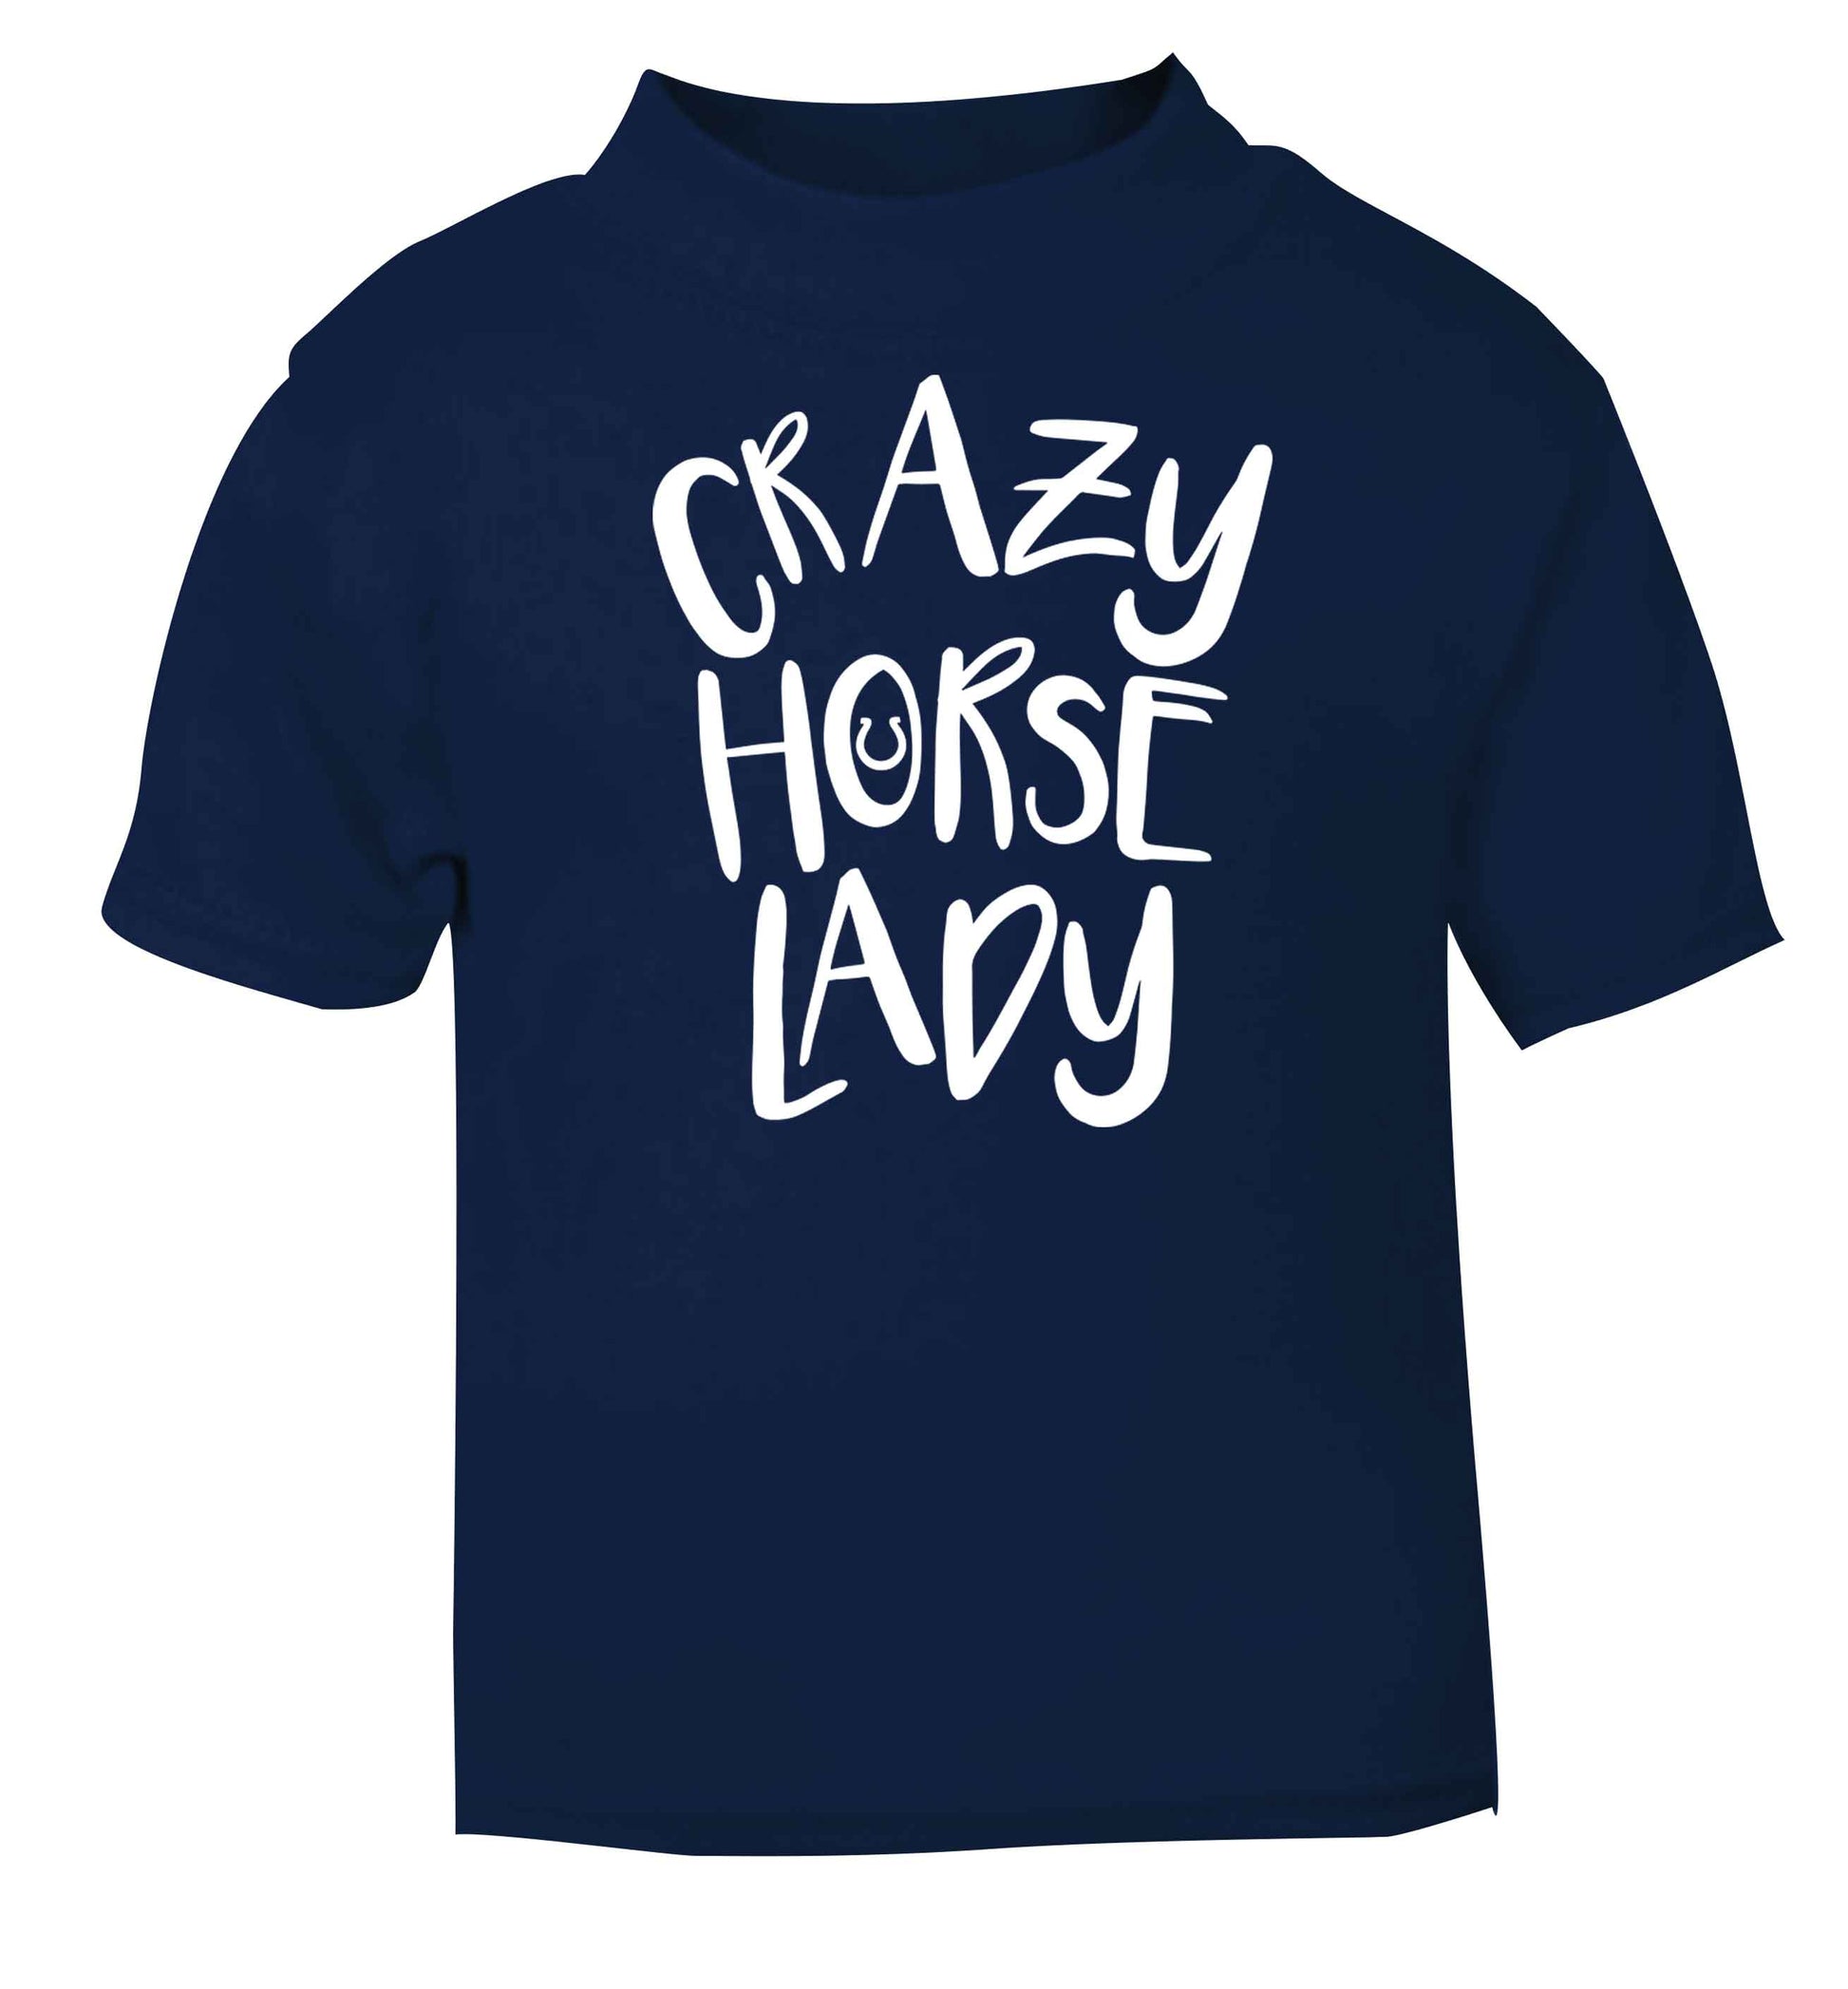 Crazy horse lady navy baby toddler Tshirt 2 Years